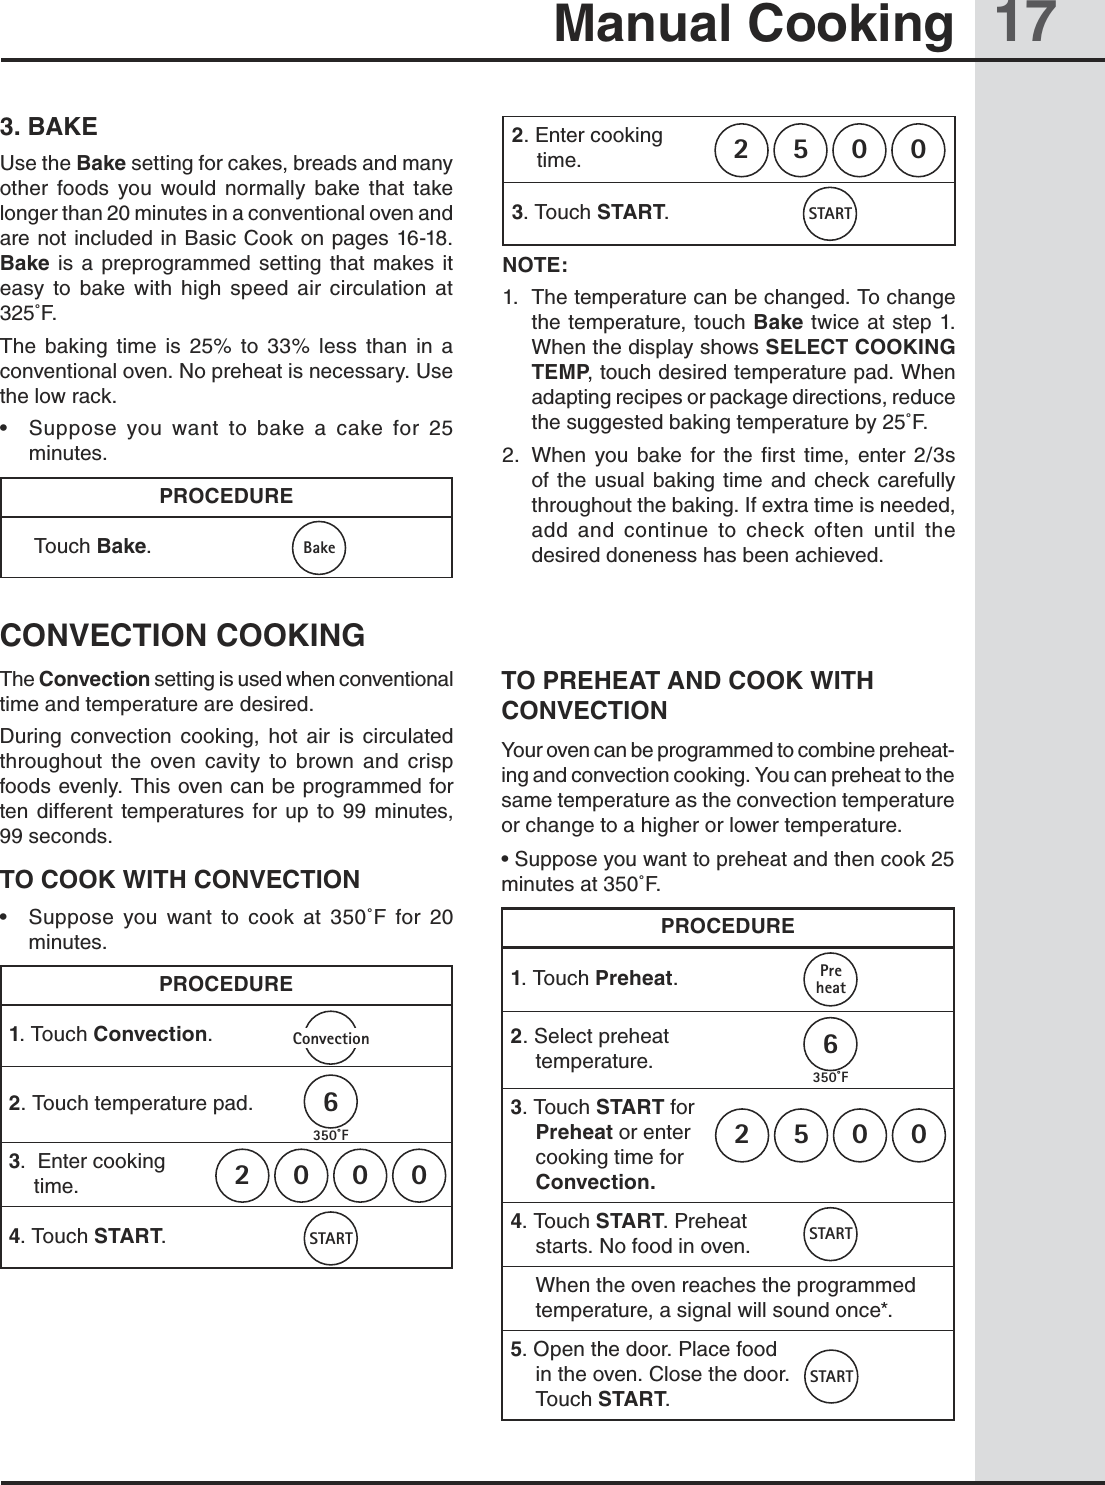 17Manual Cooking3. BAKEUse the Bake setting for cakes, breads and many other  foods  you  would  normally  bake  that  take longer than 20 minutes in a conventional oven and are not included in Basic Cook on pages 16-18. Bake  is  a  preprogrammed  setting  that makes  it easy  to  bake  with  high  speed  air  circulation  at 325˚F.The  baking  time  is  25%  to  33%  less  than  in  a conventional oven. No preheat is necessary. Use the low rack.•  Suppose  you  want  to  bake  a  cake  for  25 minutes.PROCEDURE Touch Bake.2. Enter cooking                   time.3. Touch START. NOTE:1.  The temperature can be changed. To change the temperature, touch Bake twice at step 1. When the display shows SELECT COOKING TEMP, touch desired temperature pad. When adapting recipes or package directions, reduce the suggested baking temperature by 25˚F.2.  When  you  bake  for  the  first  time,  enter  2/3s of the  usual  baking  time  and check  carefully throughout the baking. If extra time is needed, add  and  continue  to  check  often  until  the desired doneness has been achieved.CONVECTION COOKINGThe Convection setting is used when conventional time and temperature are desired.During  convection  cooking,  hot  air  is  circulated throughout  the  oven  cavity  to  brown  and  crisp foods evenly. This oven can be programmed for ten  different temperatures  for  up  to  99  minutes, 99 seconds.TO COOK WITH CONVECTION•  Suppose  you  want  to  cook  at  350˚F  for  20 minutes.PROCEDURE1. Touch Convection.2. Touch temperature pad.  3.  Enter cooking                   time.4. Touch START.TO PREHEAT AND COOK WITH CONVECTIONYour oven can be programmed to combine preheat-ing and convection cooking. You can preheat to the same temperature as the convection temperature or change to a higher or lower temperature.• Suppose you want to preheat and then cook 25 minutes at 350˚F. PROCEDURE1. Touch Preheat.2. Select preheat       temperature.3. Touch START for  Preheat or enter    cooking time for  Convection.4. Touch START. Preheat starts. No food in oven. When the oven reaches the programmed temperature, a signal will sound once*.5. Open the door. Place food in the oven. Close the door. Touch START.0052BakeSTART0002ConvectionSTART6350˚F 0052PreheatSTARTSTART6350˚F